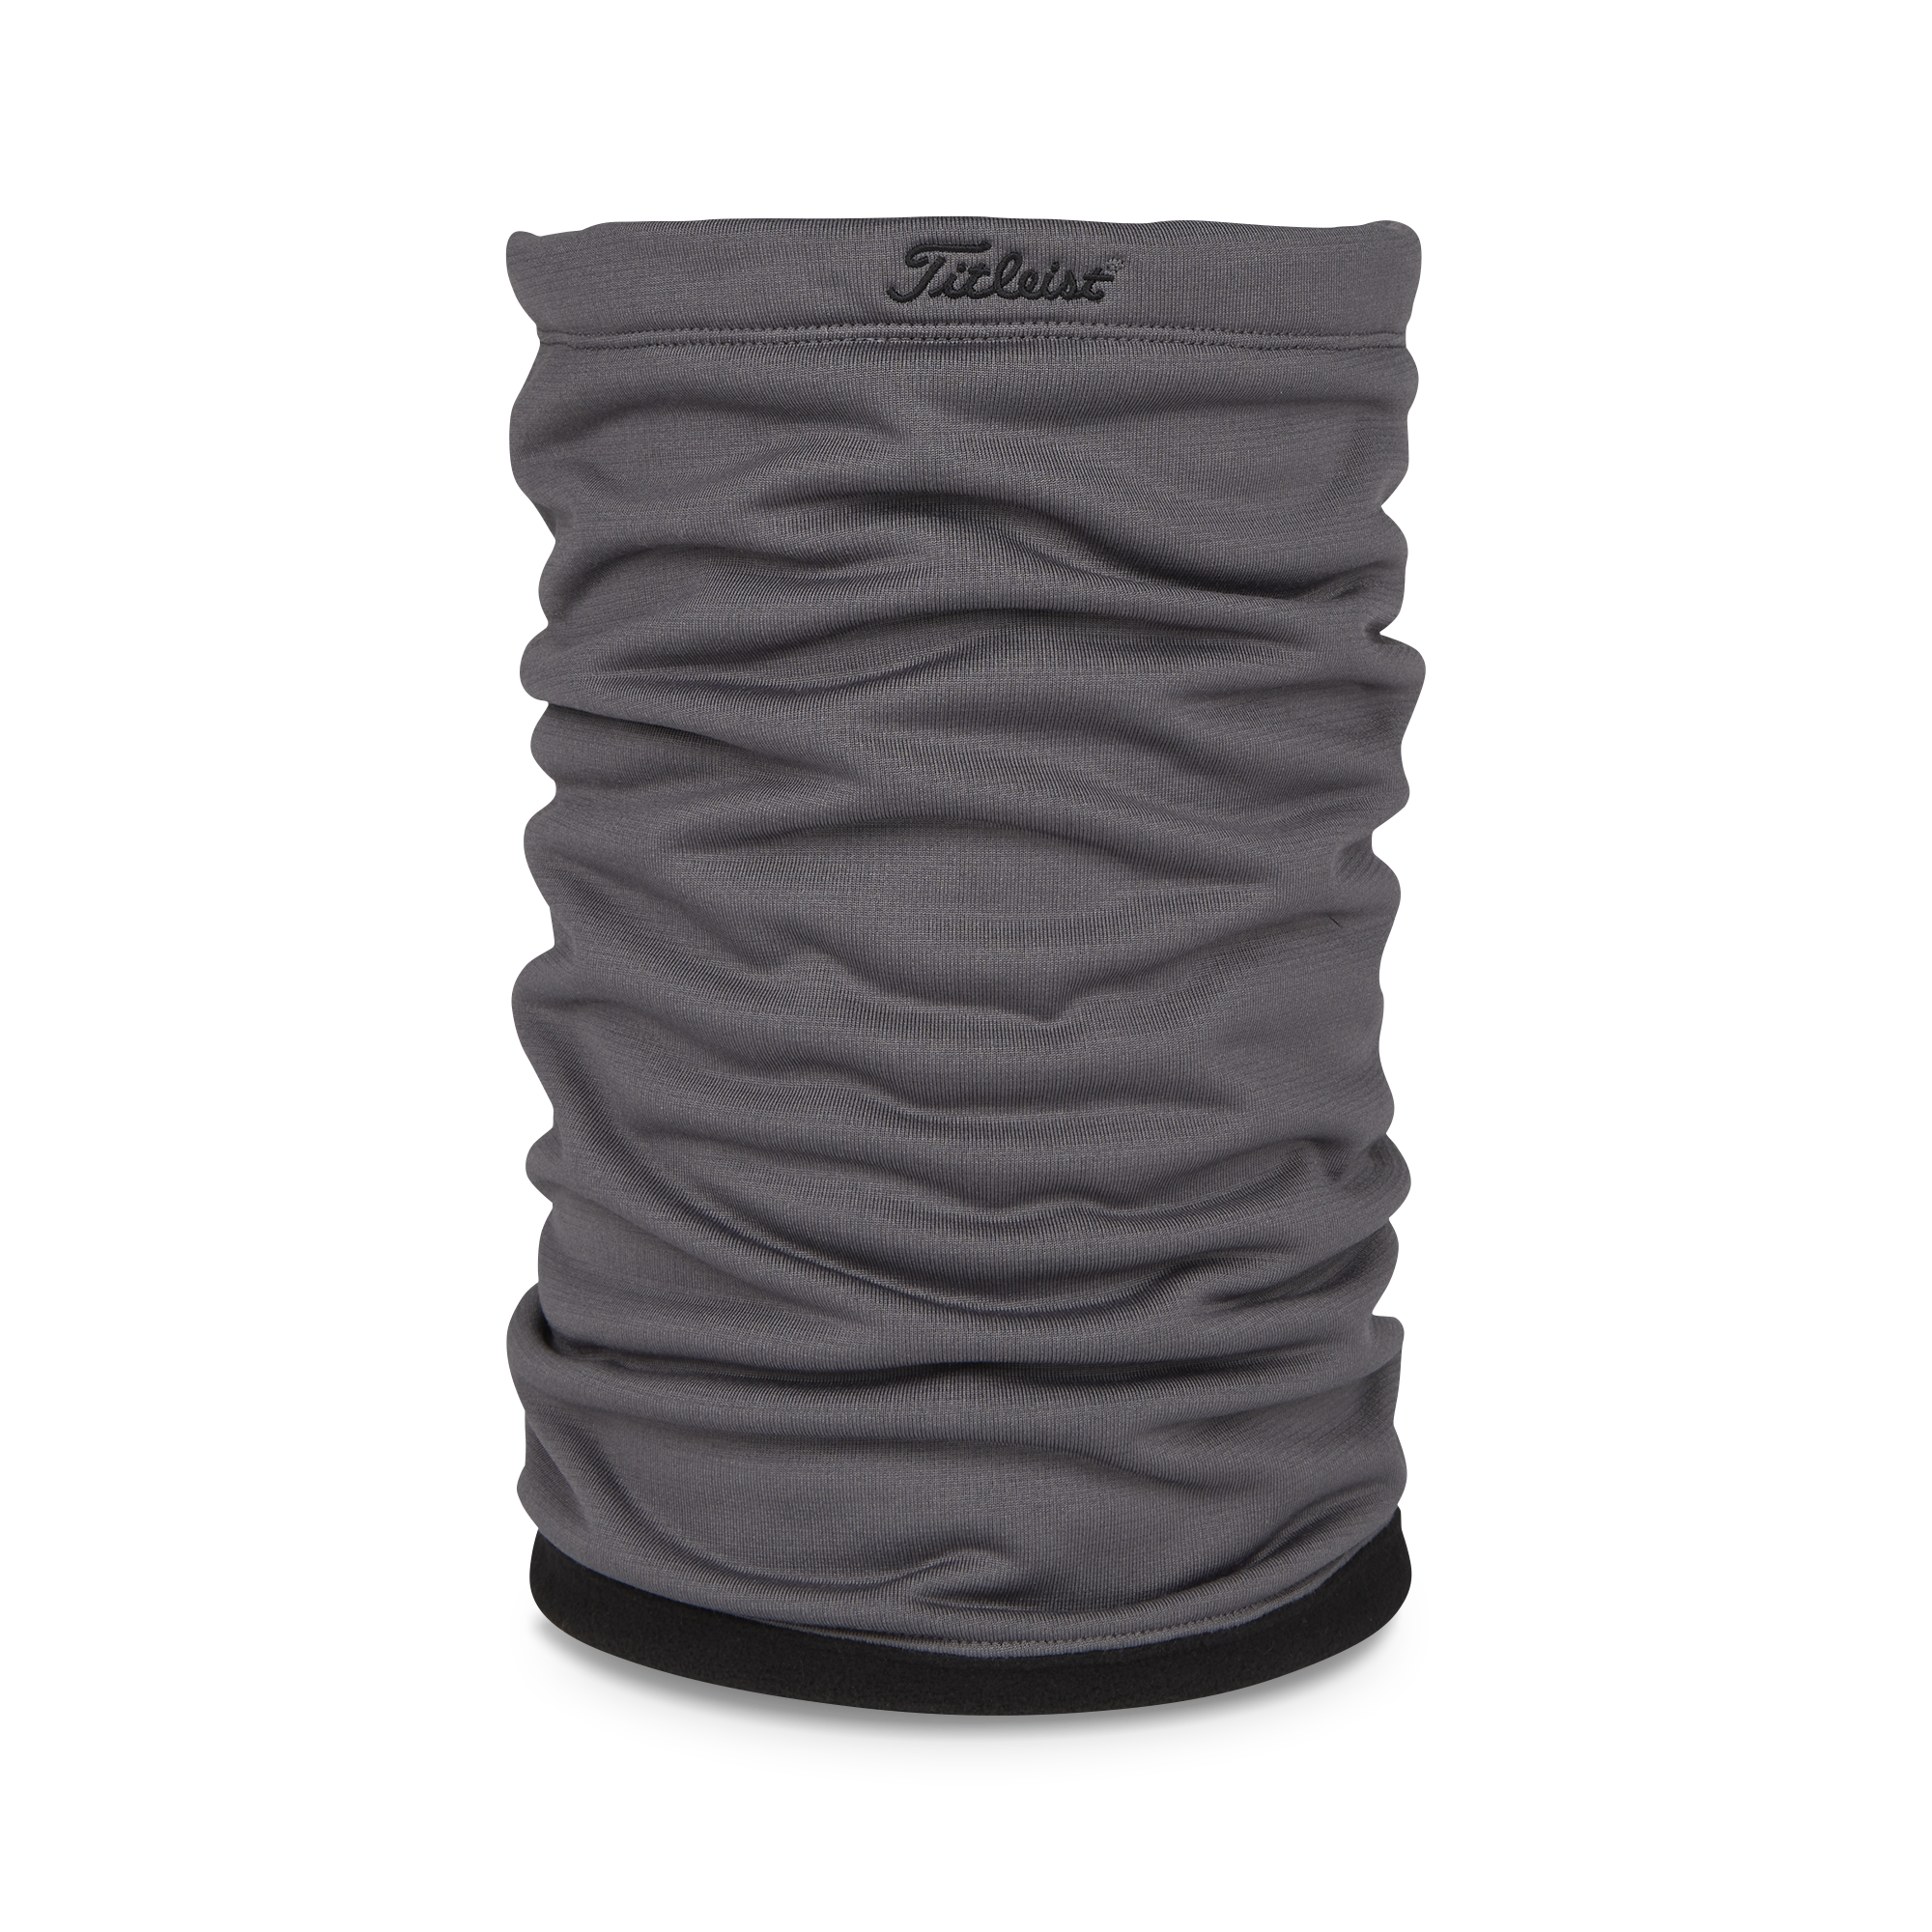 Titleist Official Performance Snood Neck Warmer in Charcoal/Black